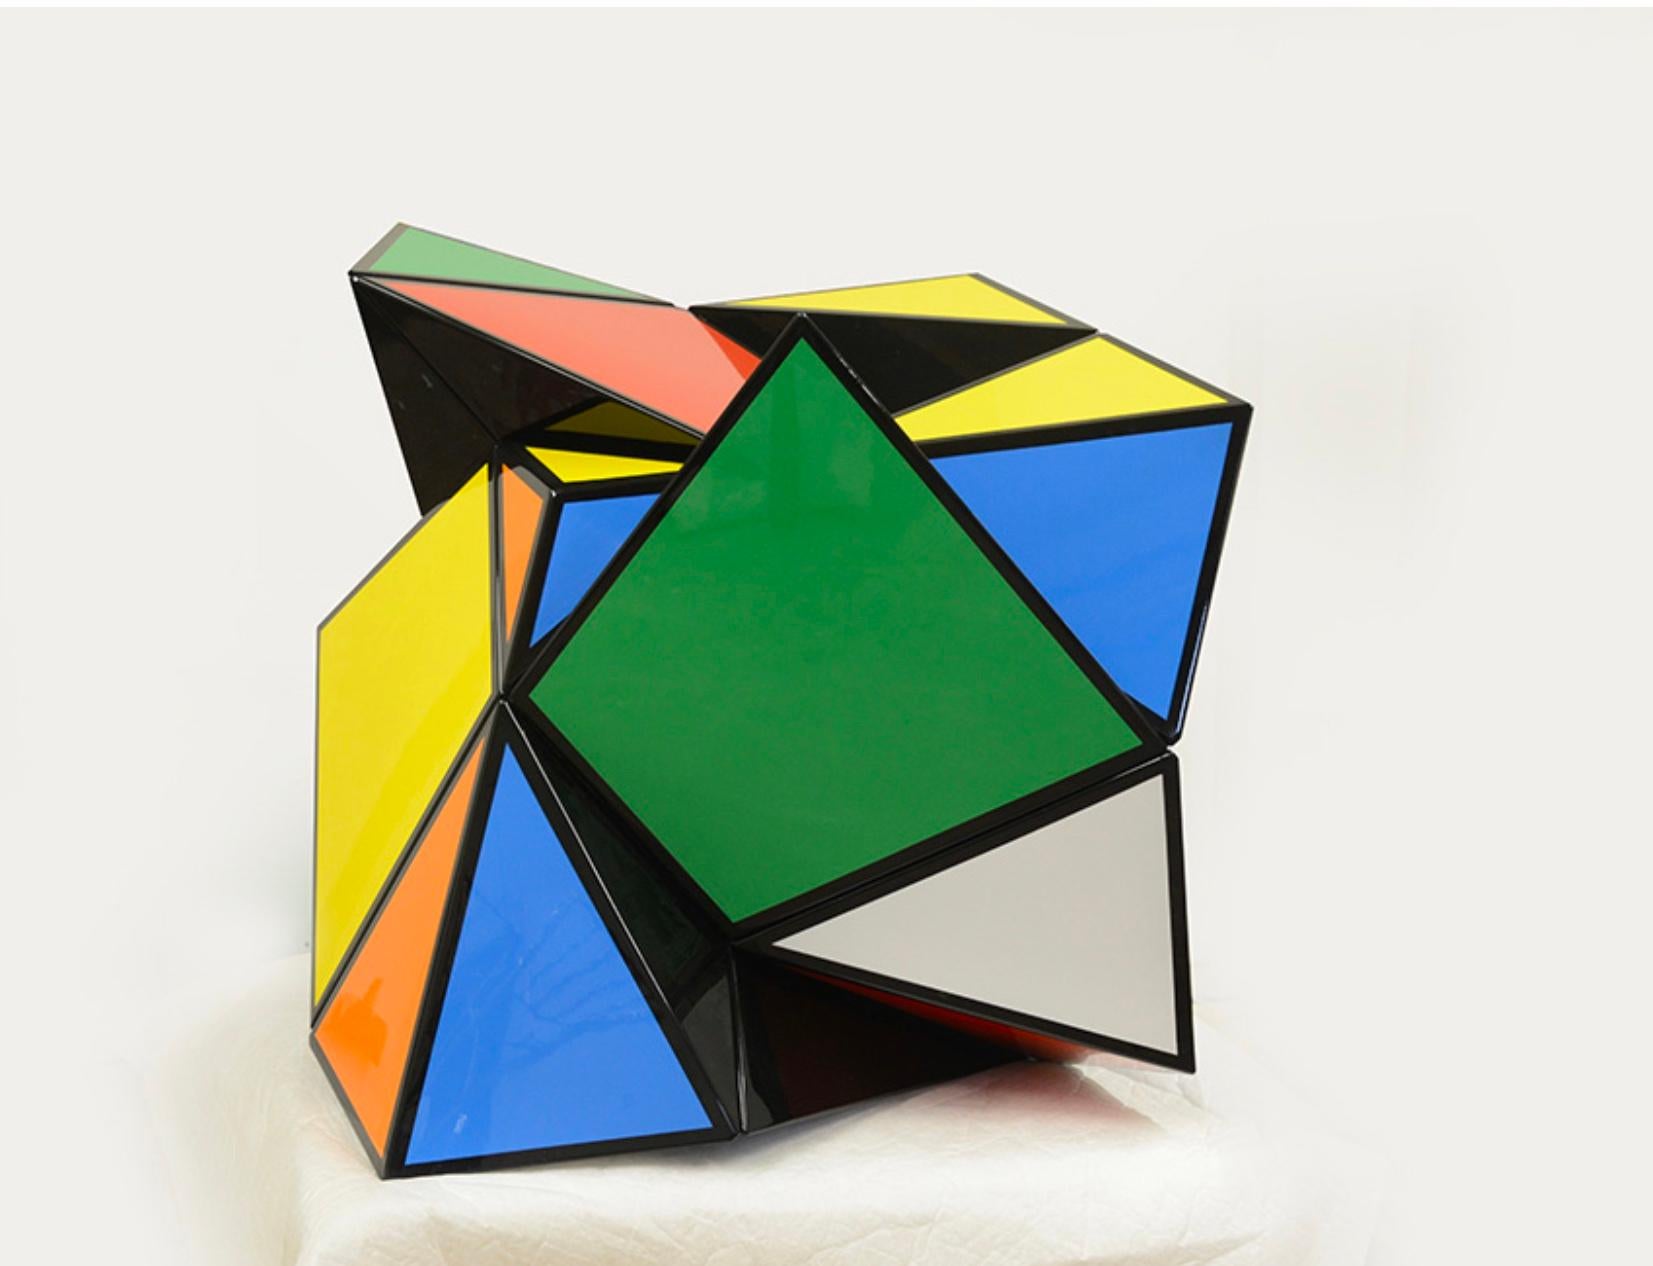 Magic Cube 3.1.2 - Abstract Geometric Sculpture by Jannis Markopoulos